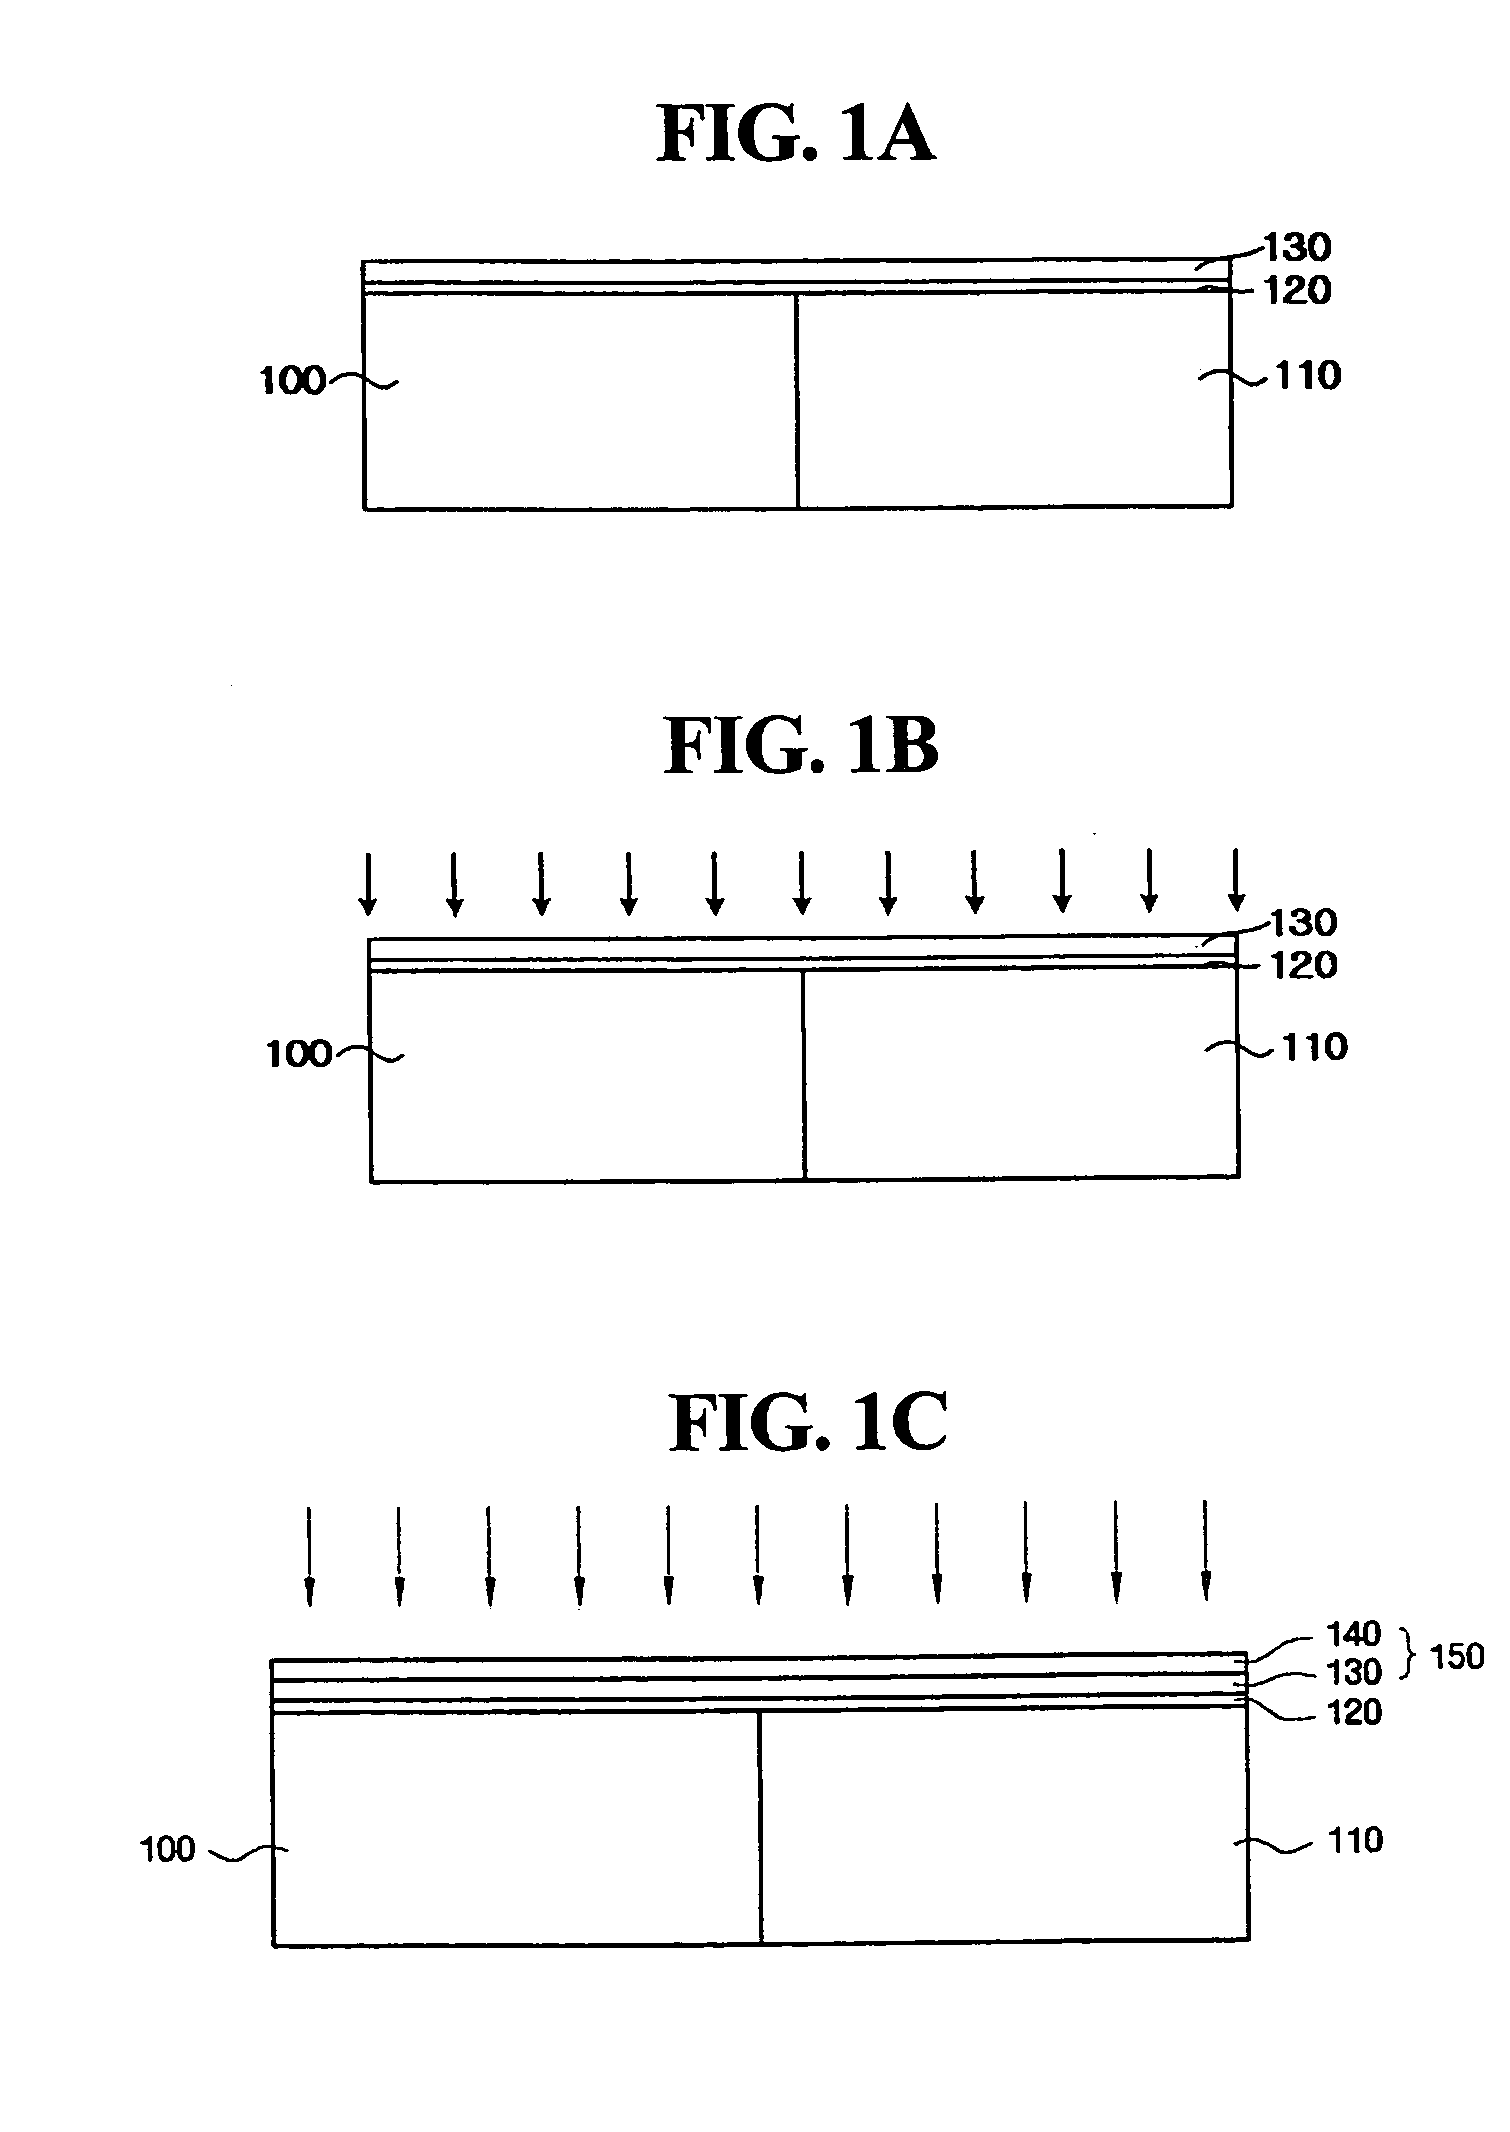 Method of fabricating gate of semiconductor device using oxygen-free ashing process